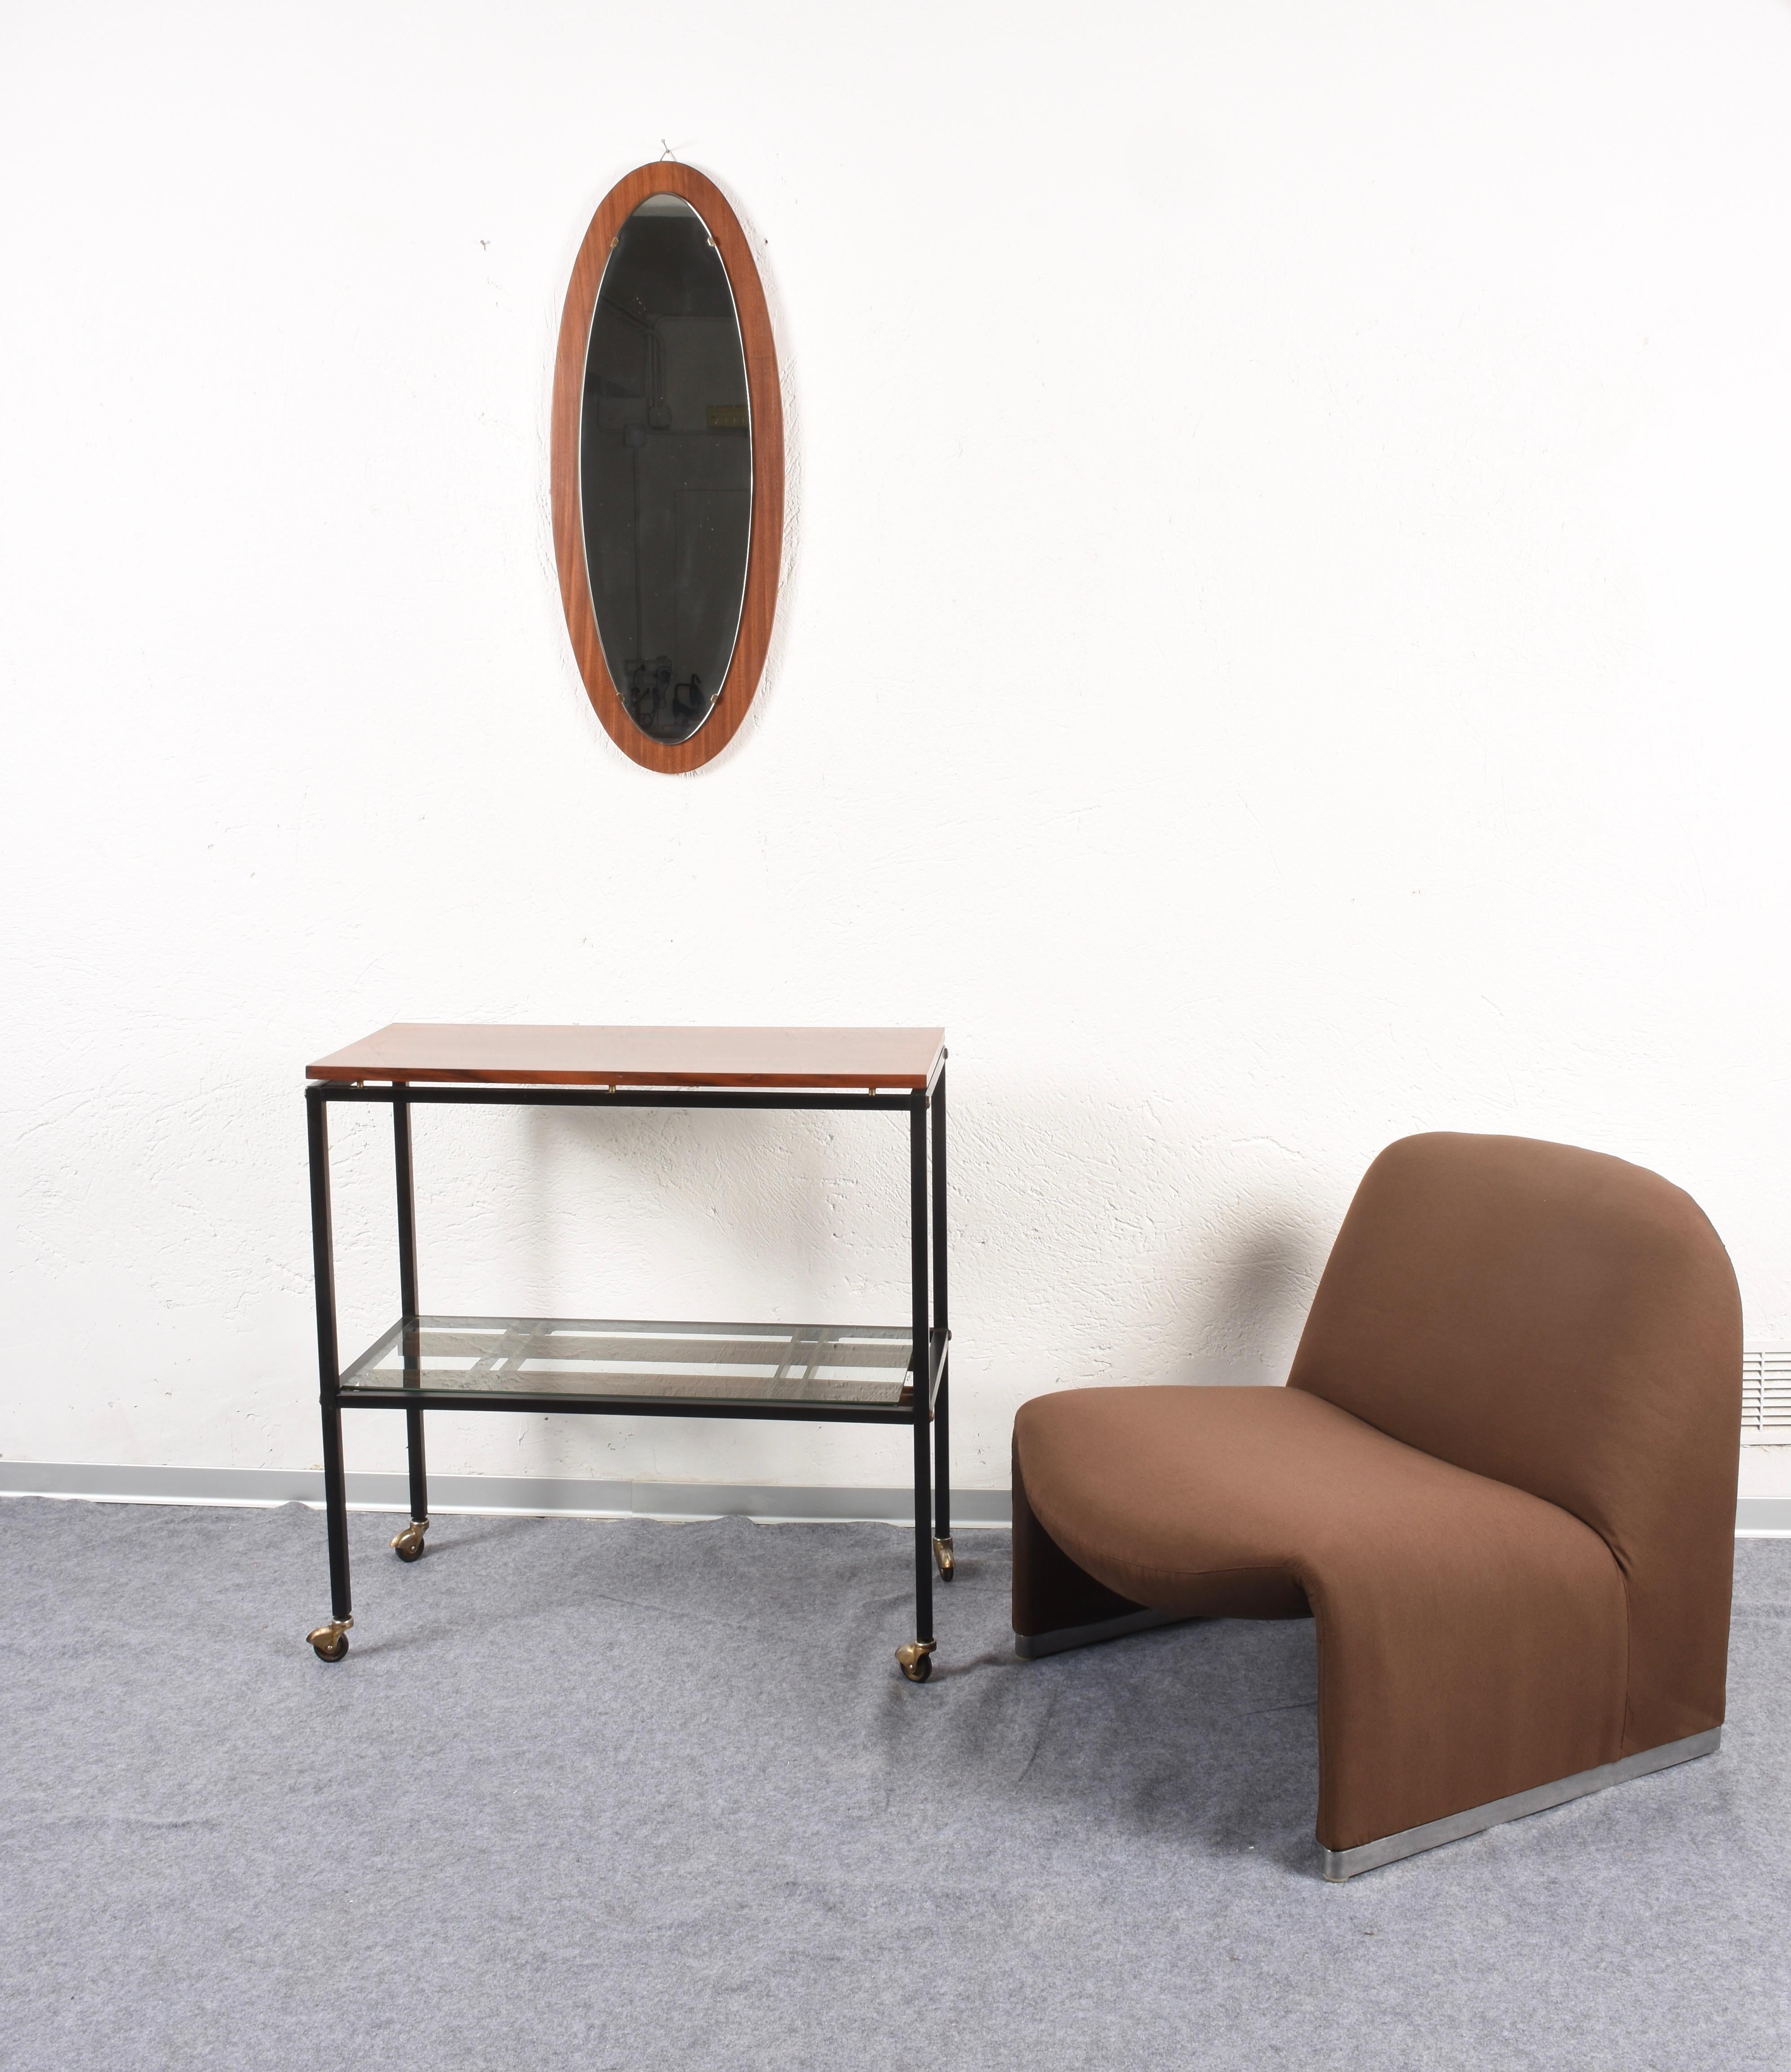 Brown armchair, Alky model by Giancarlo Piretti. Produced by Castelli in Italy in the 70s
Very comfortable. Lined with brown fabric.
Made with foam. Aluminum base.
Fair conditions